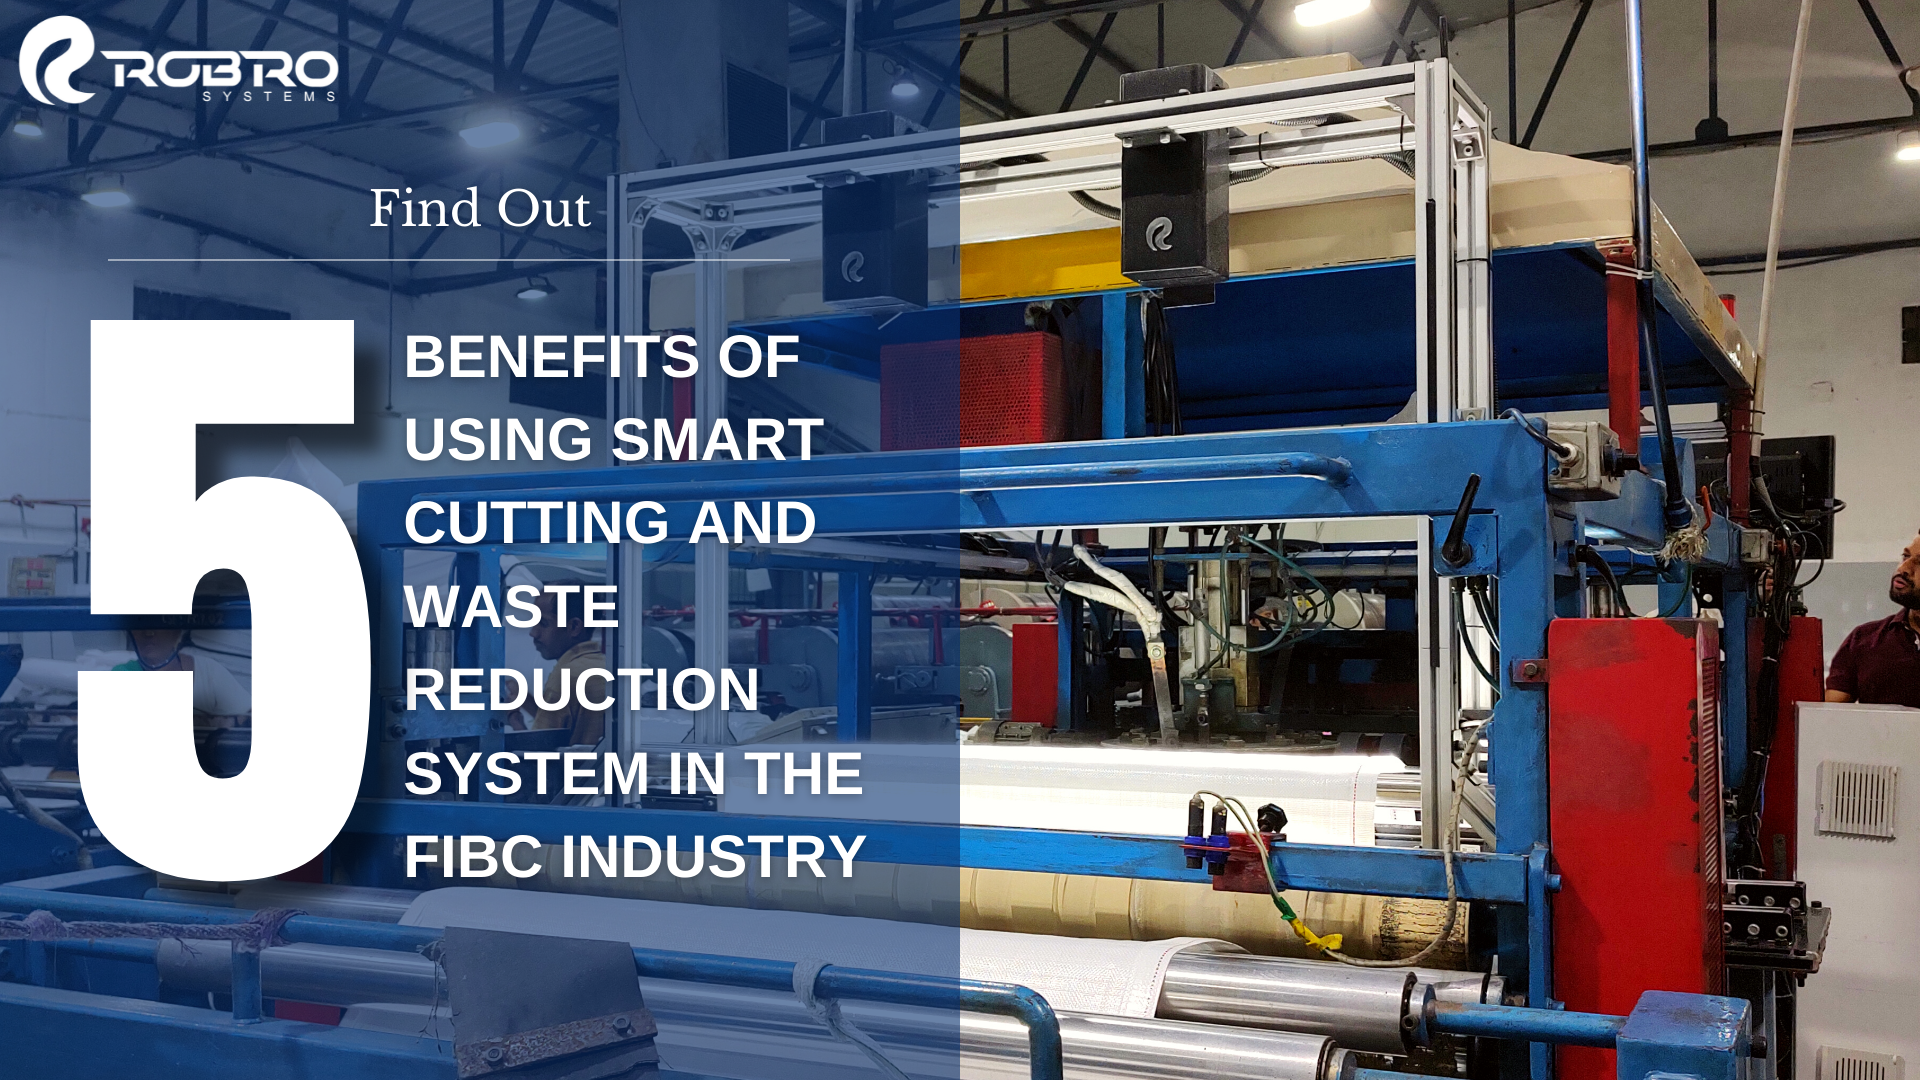 5 benefits of using smart cutting and waste reduction system in the FIBC industry